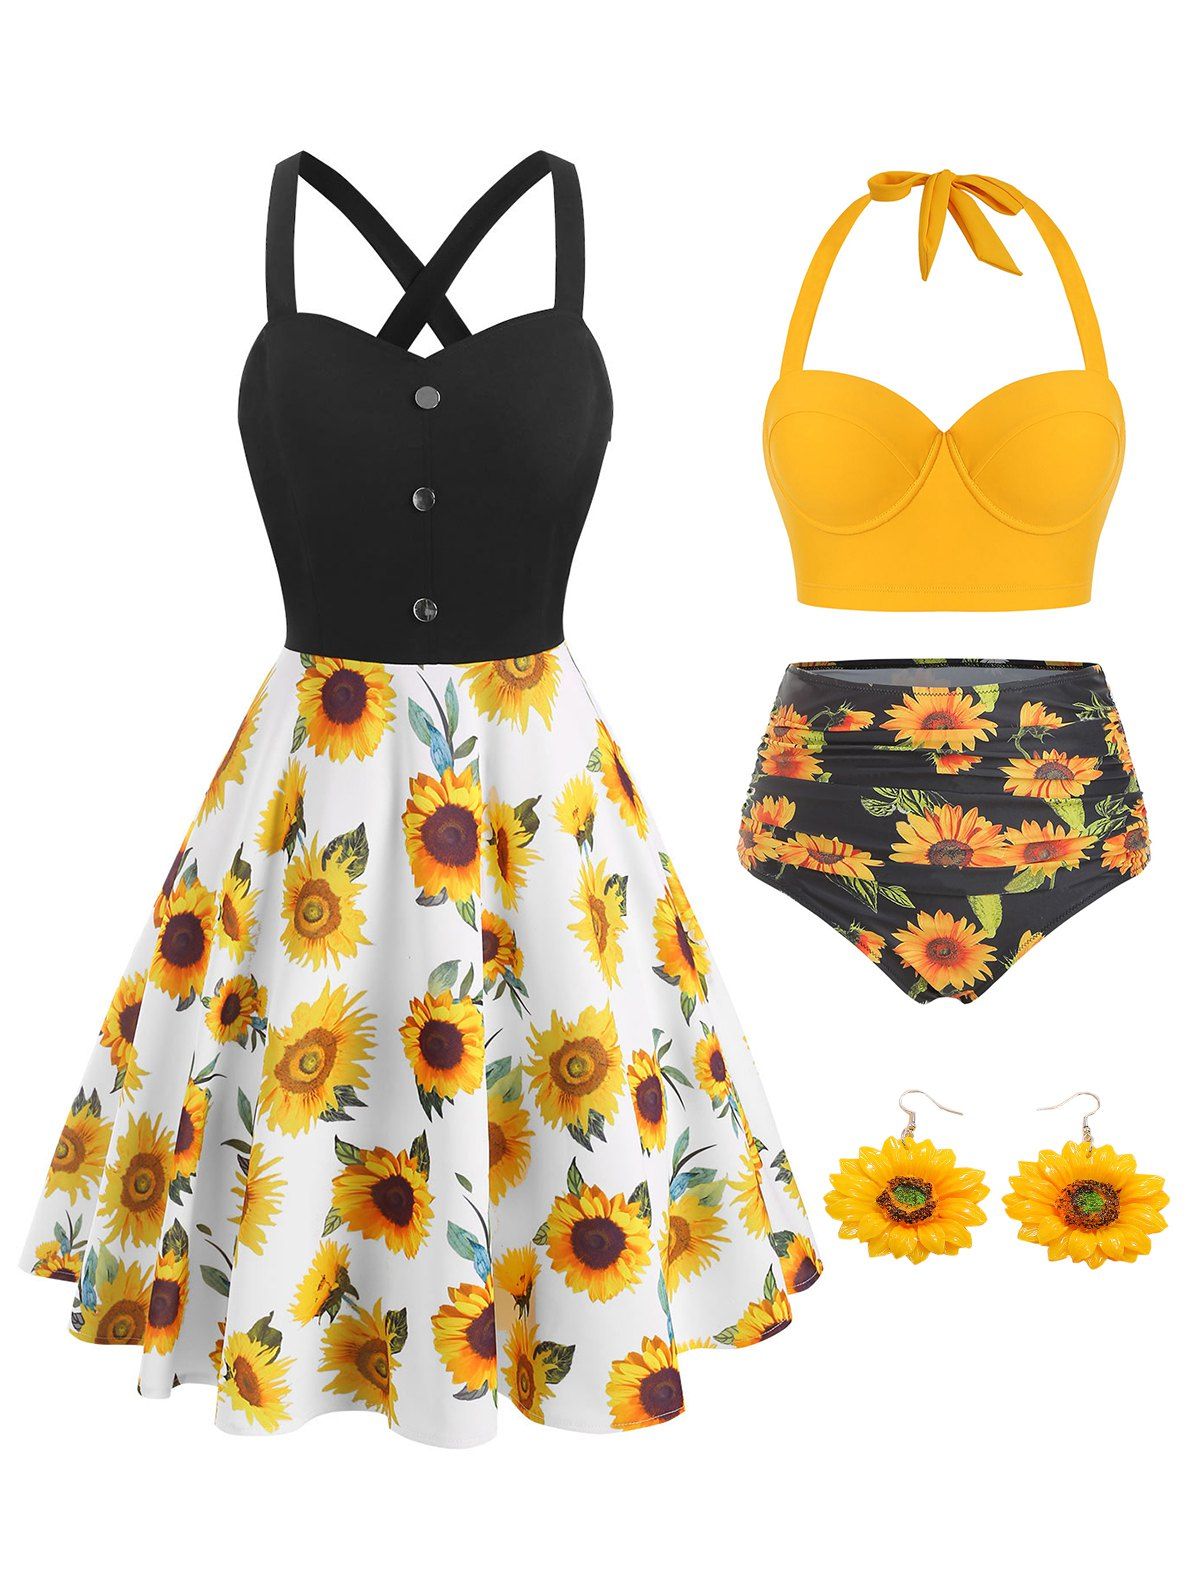 Sunflower Print Tummy Control Ruched Halter Bikini Swimsuit and Crossover Mock Button A Line Flower Print Sundress and Floral Drop Earrings Three Piece Summer Outfit - multicolor S